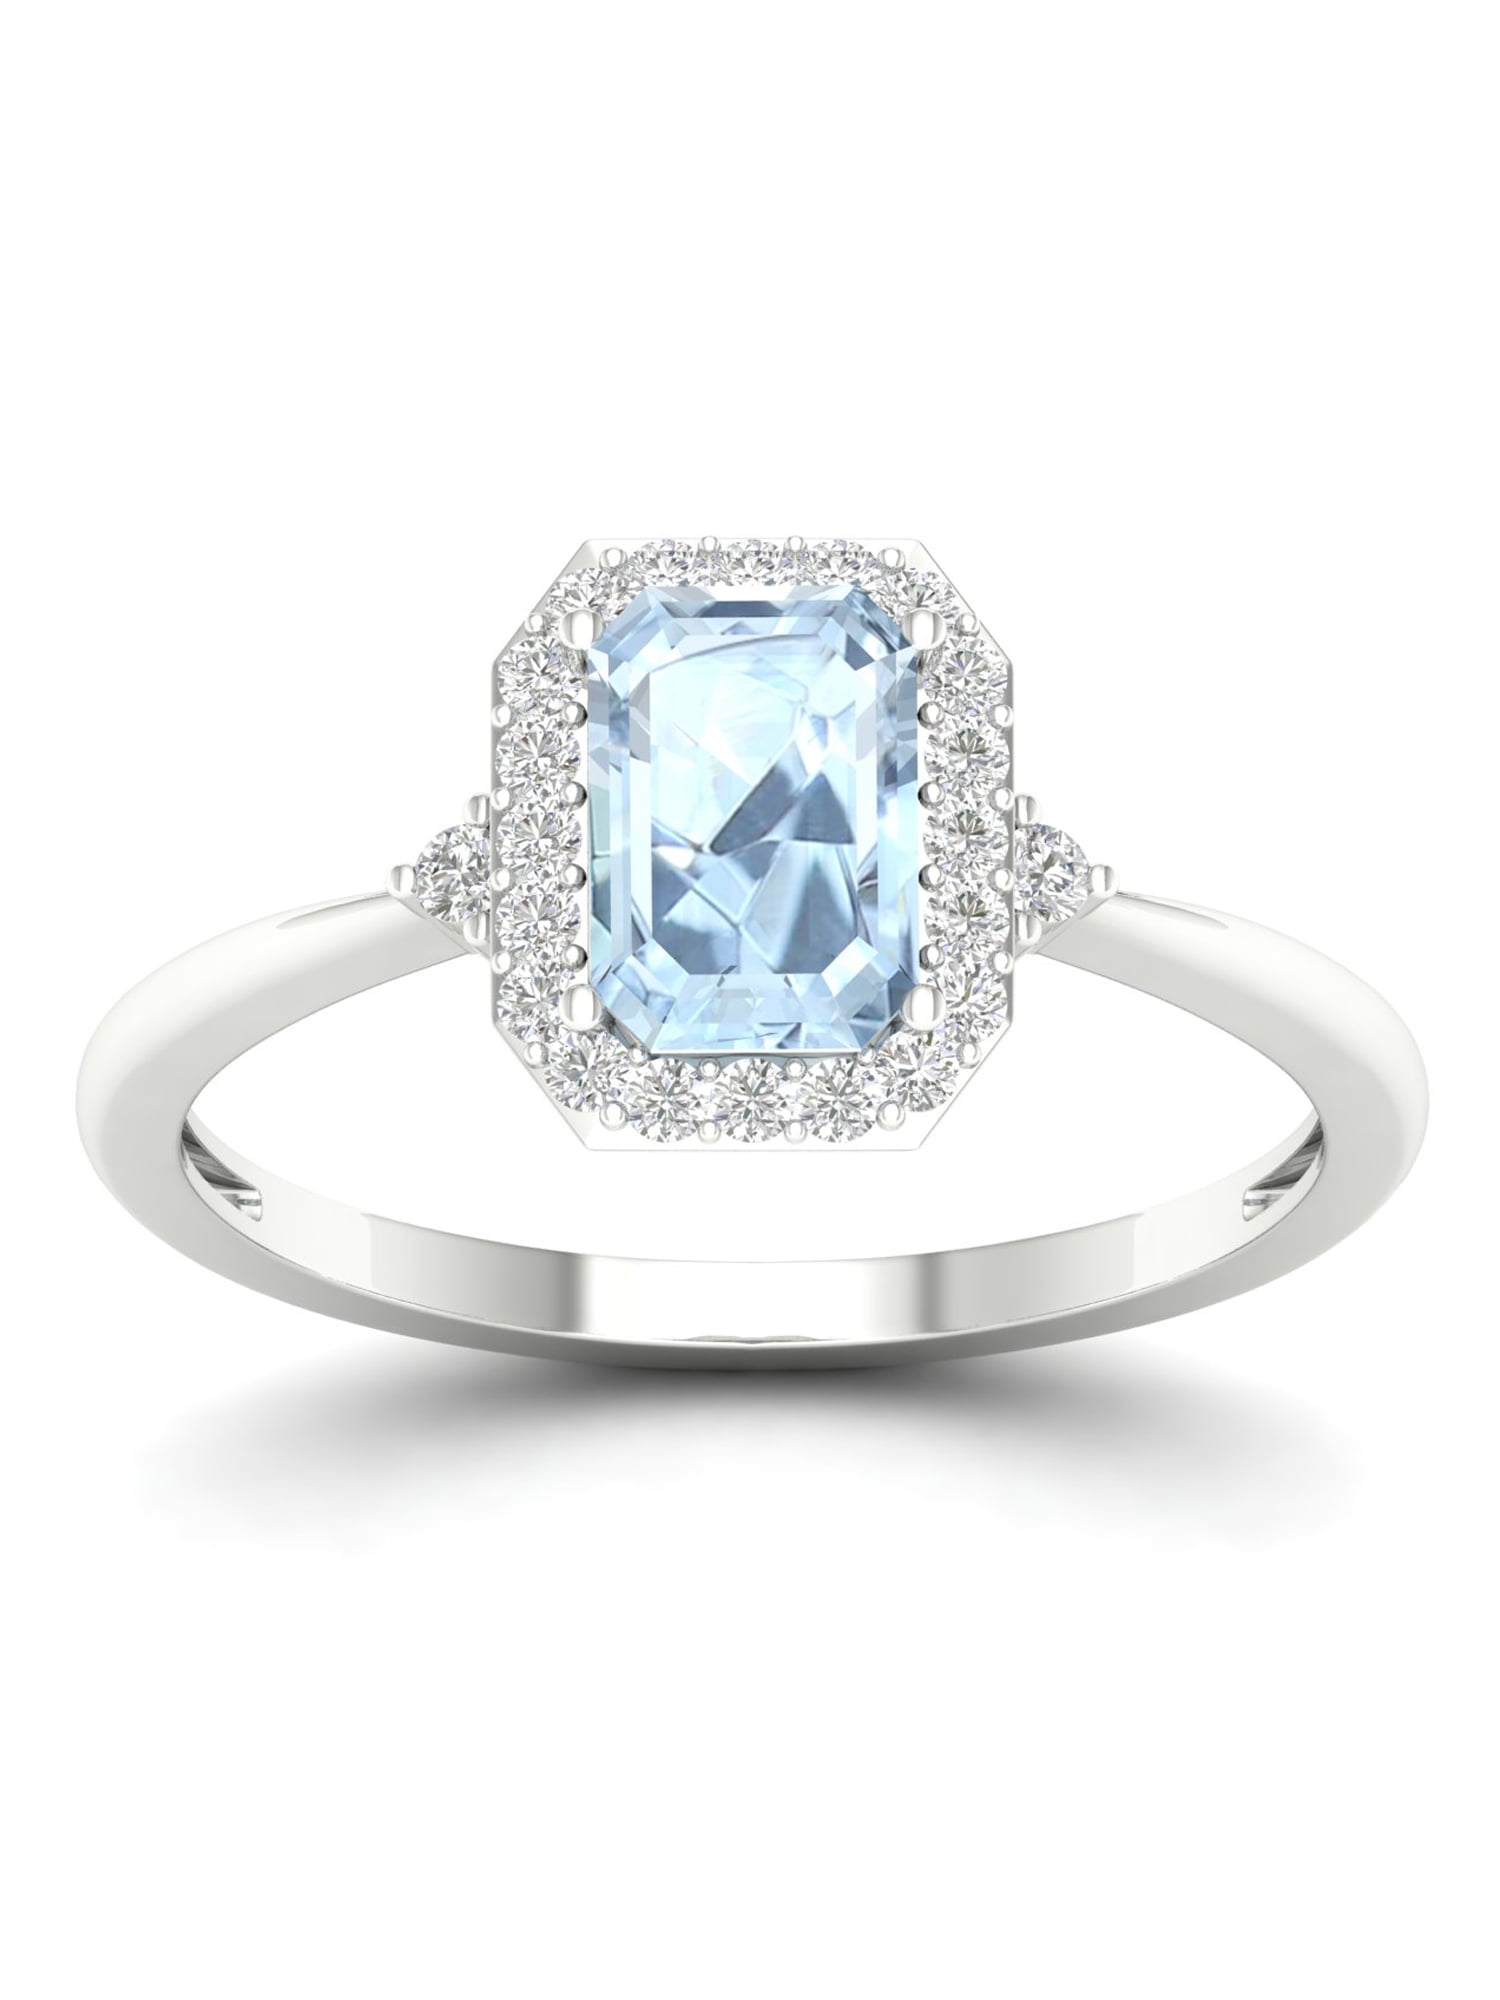 Oval Cut Aquamarine 10K White Gold Solitaire Engagement Ring 